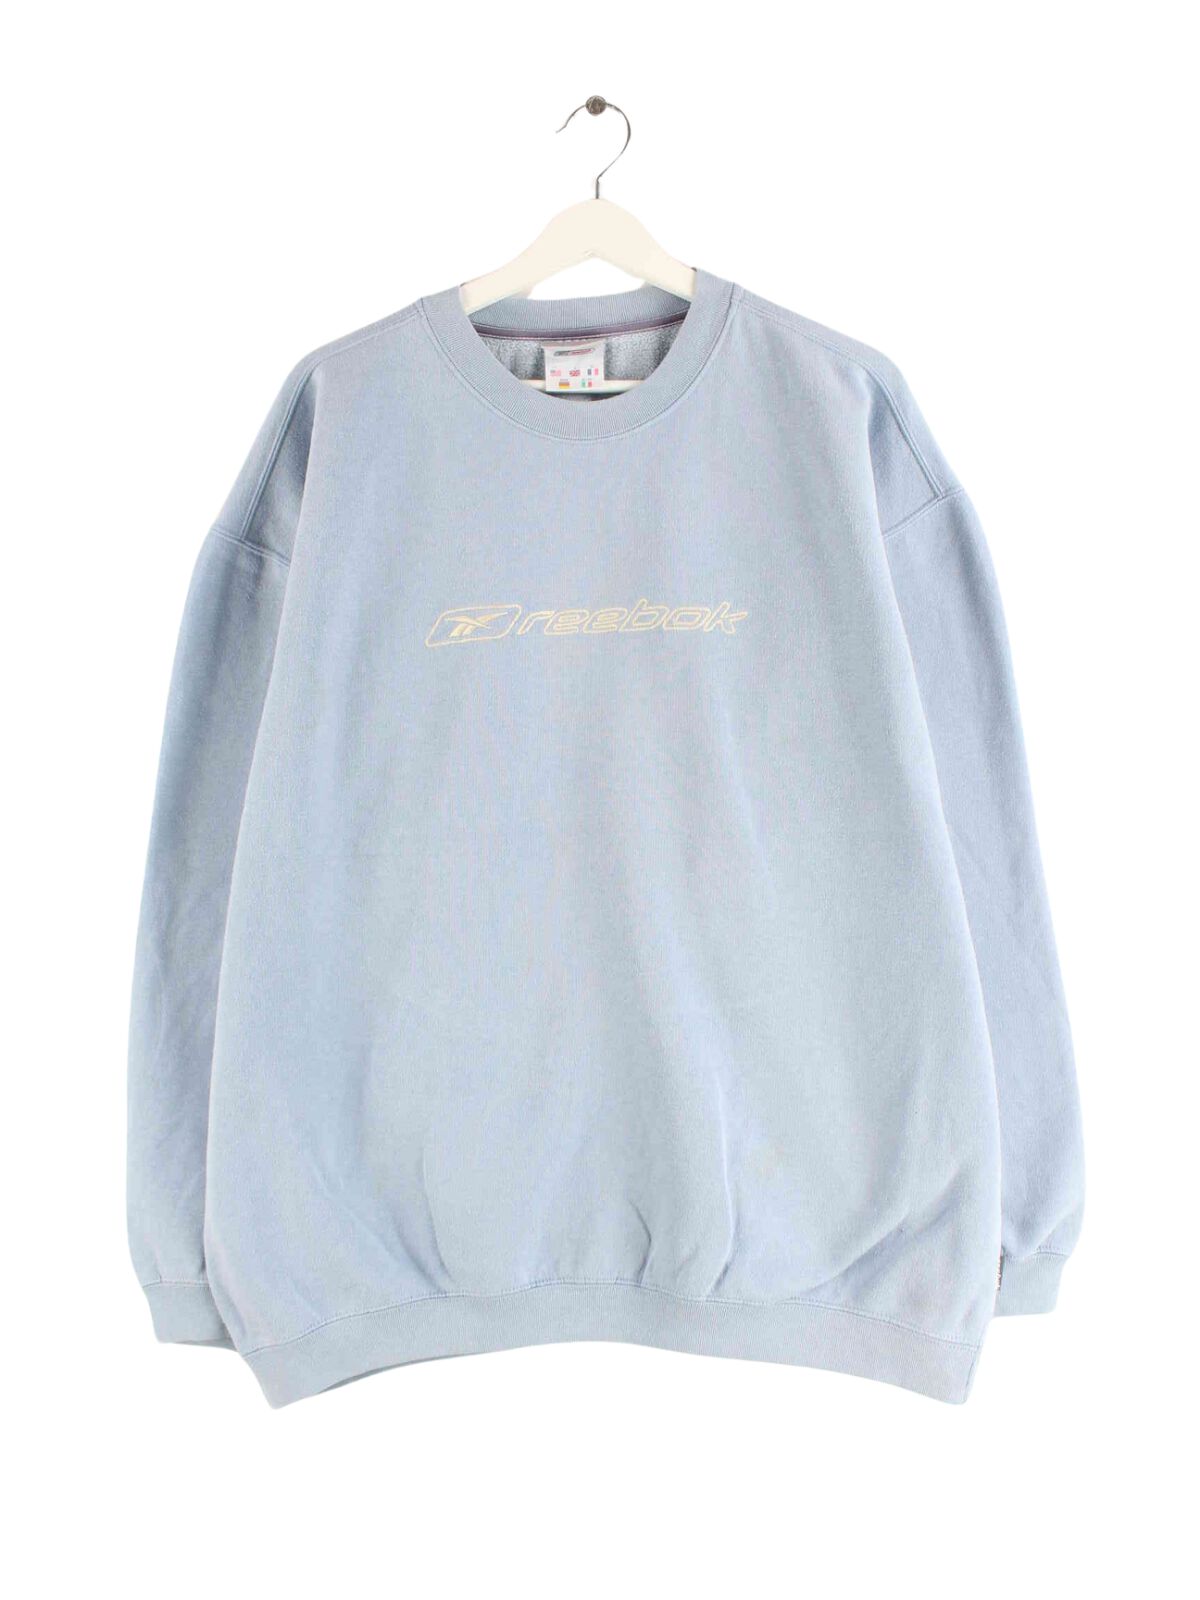 Reebok y2k Embroidered Sweater Blau L (front image)